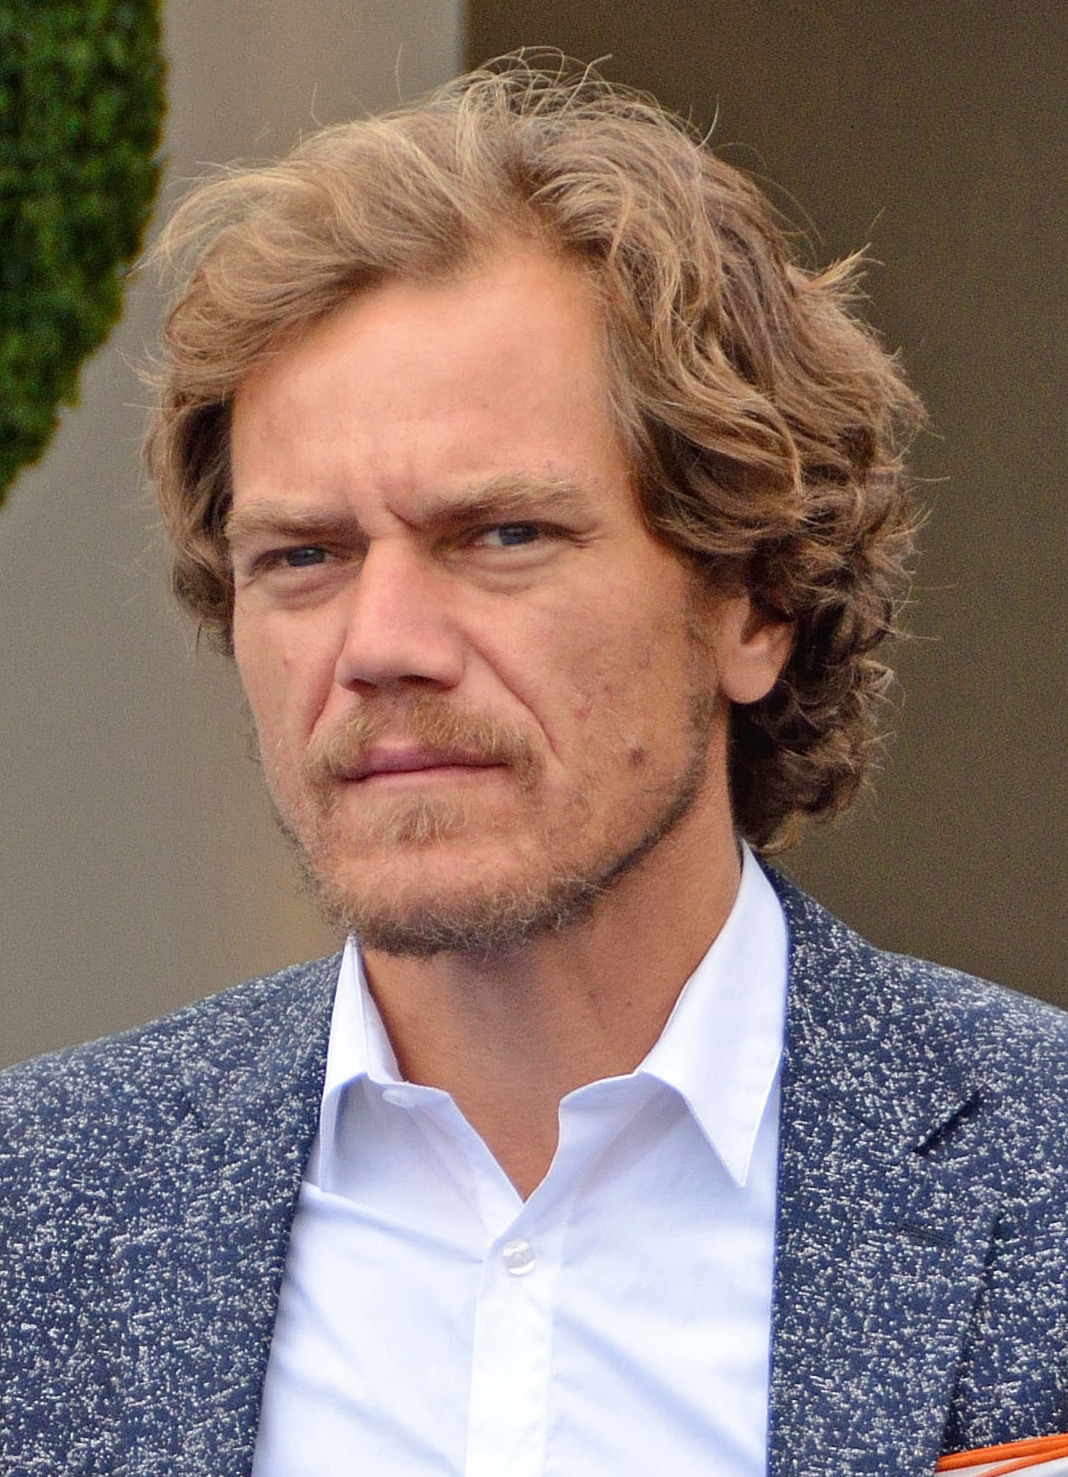 Michael Shannon sets adaptation of 'Eric Larue' play as his directorial debut